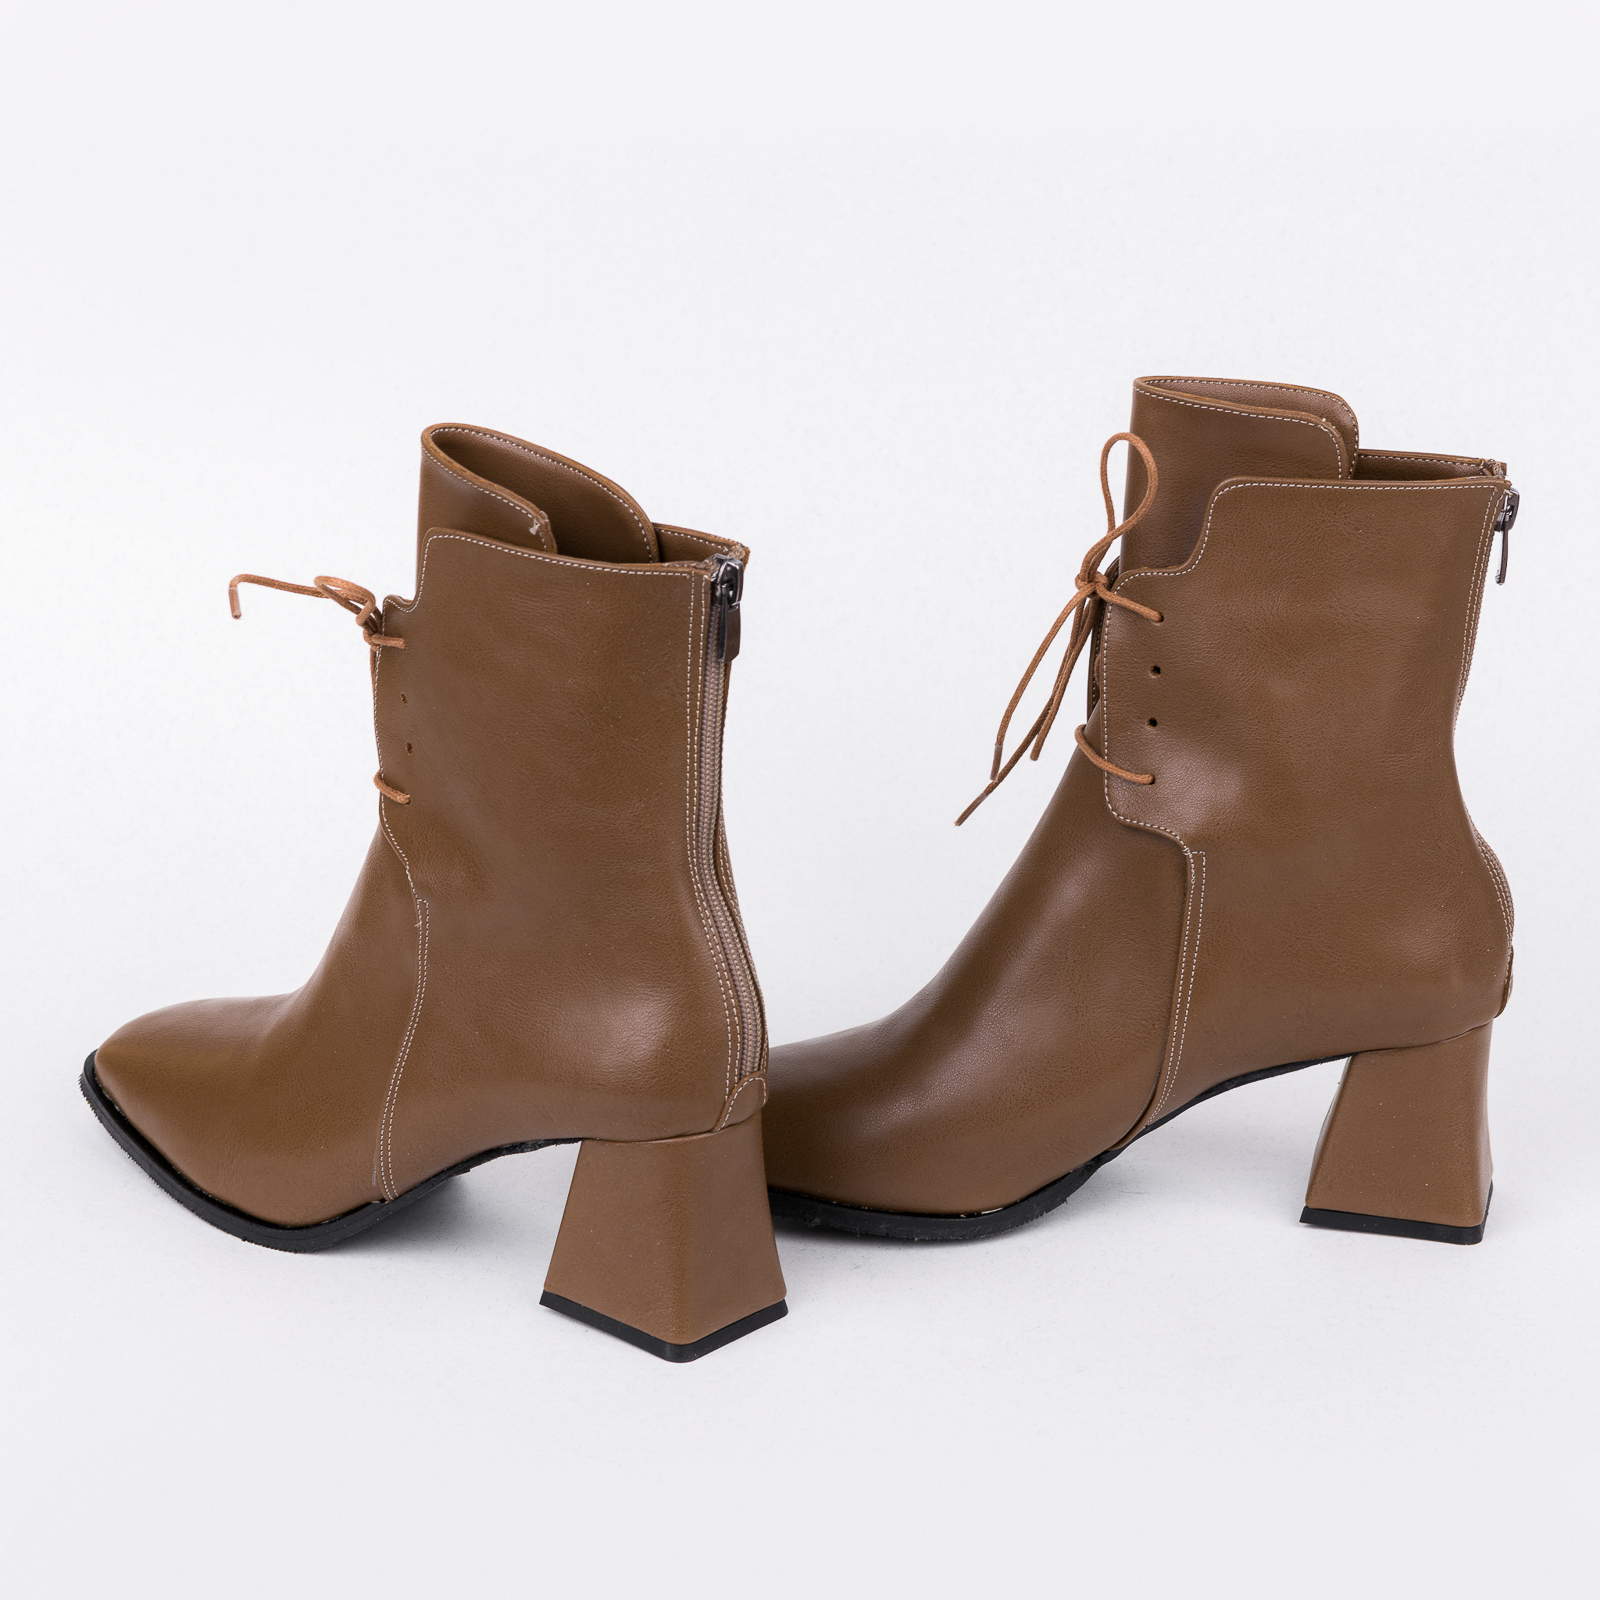 Women ankle boots B399 - BROWN